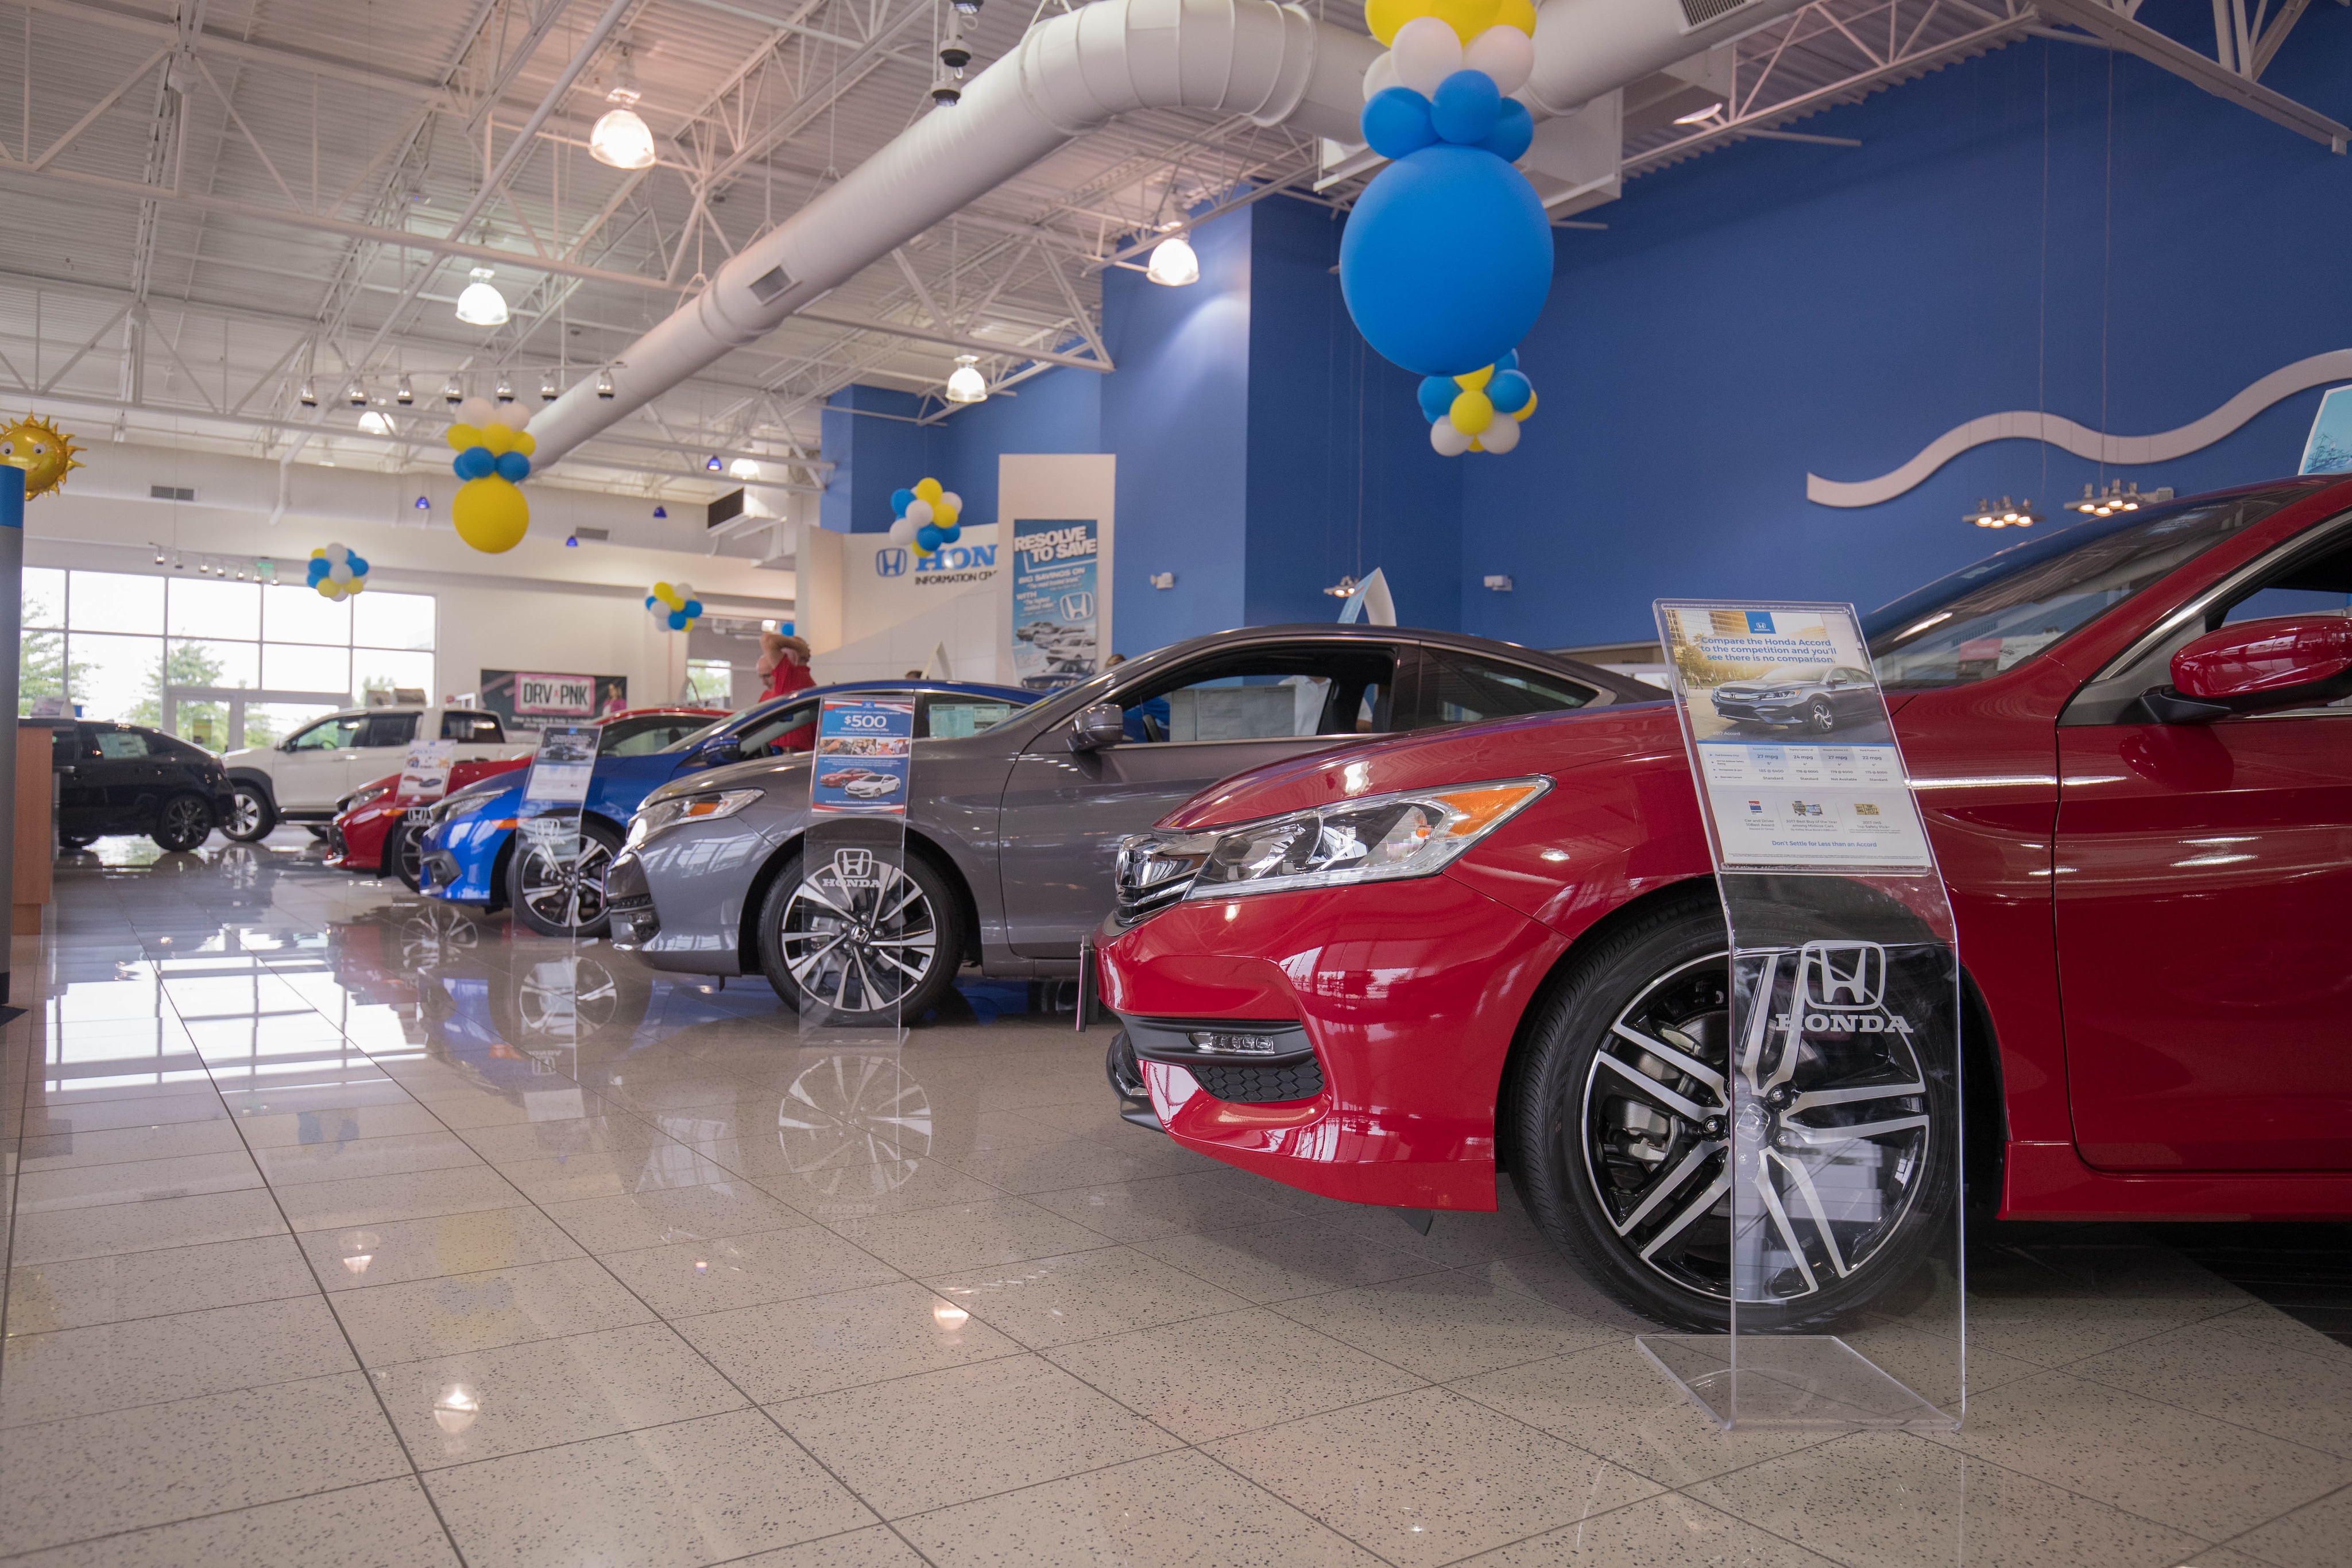 About AutoNation Honda Dulles in Sterling, VA AutoNation Honda Dulles